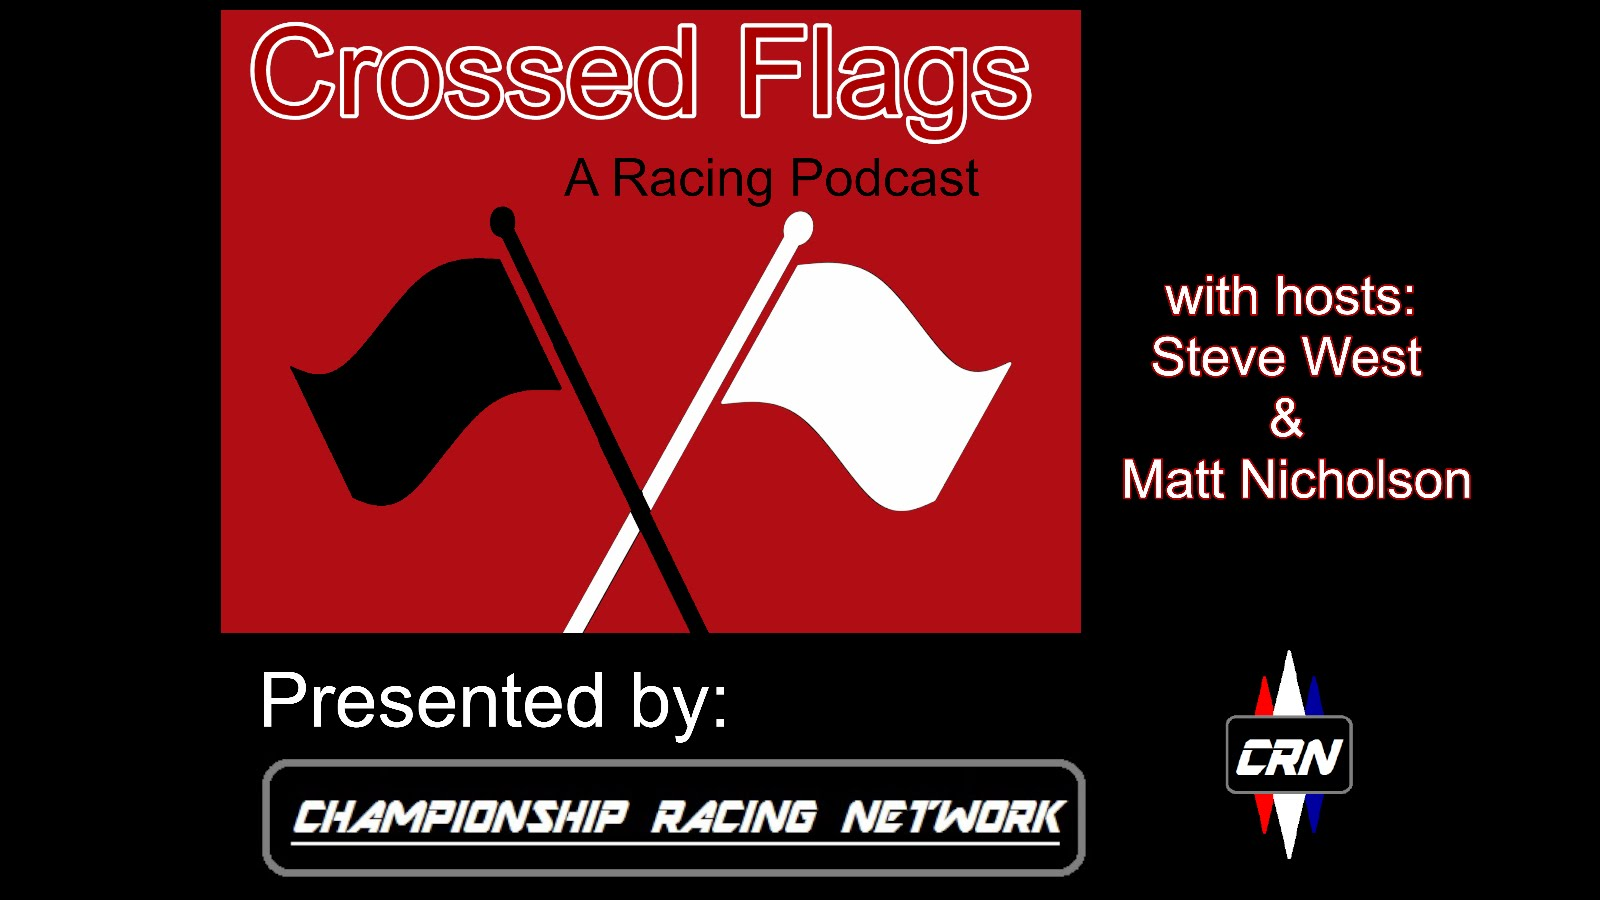 Crossed Flags Episode 5: Consistency of rules and memories